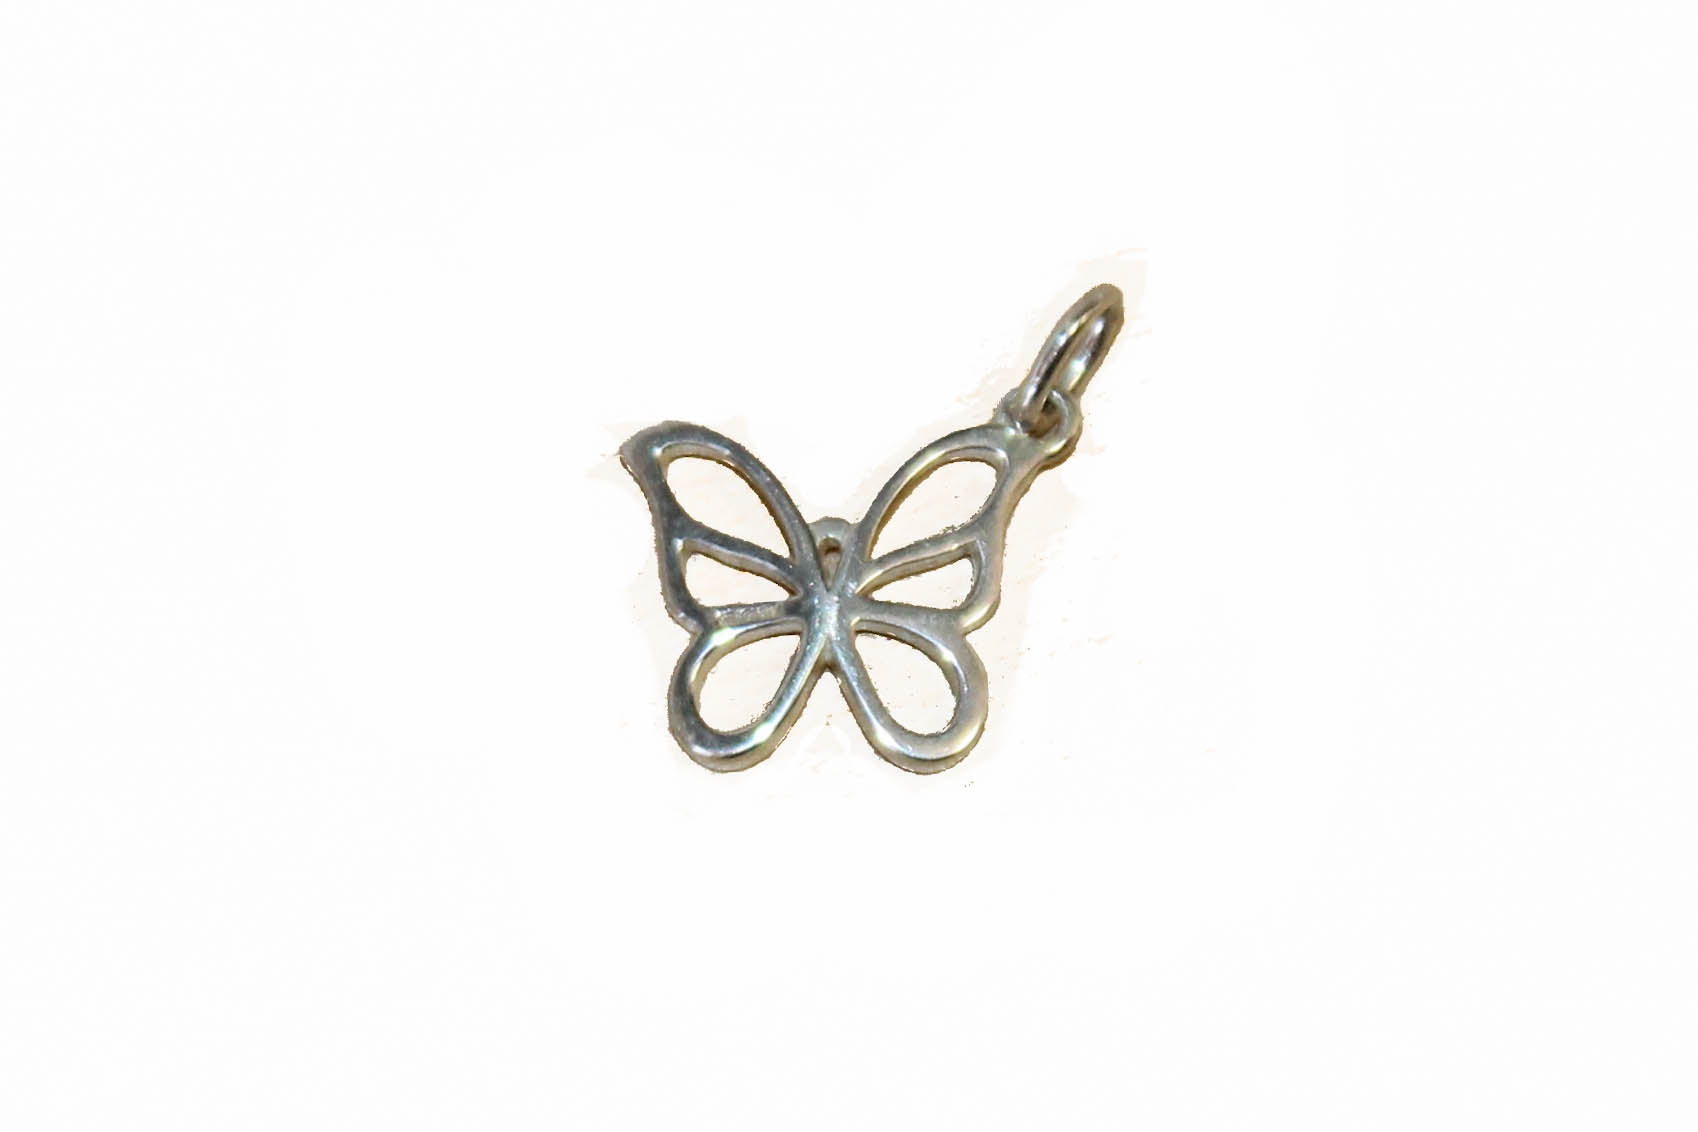 Authentic Tiffany & Co. Sterling Silver Butterfly Pendant